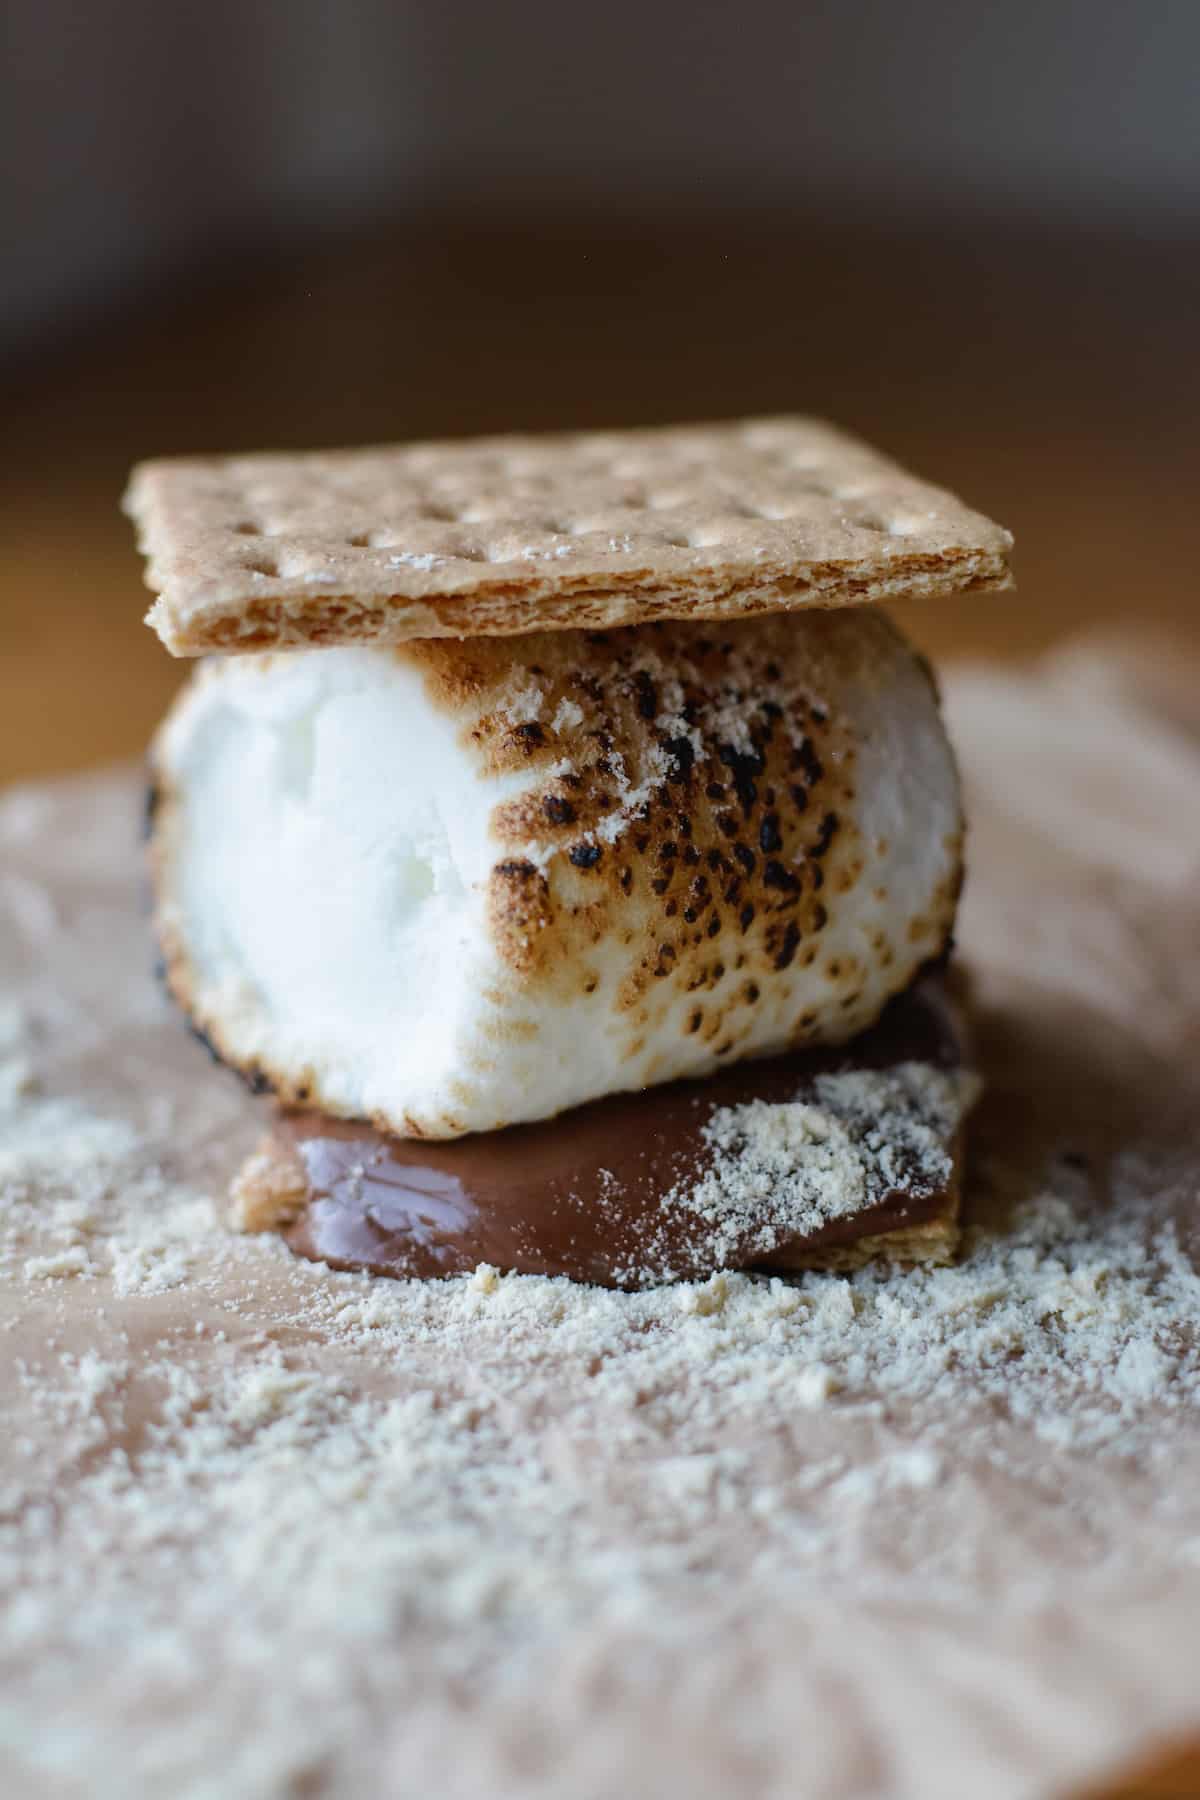 Check out these 12 S'mores combinations that will leave you drooling. From Choco Banana to Lemon Meringue Pie this campfire treat has never been better!